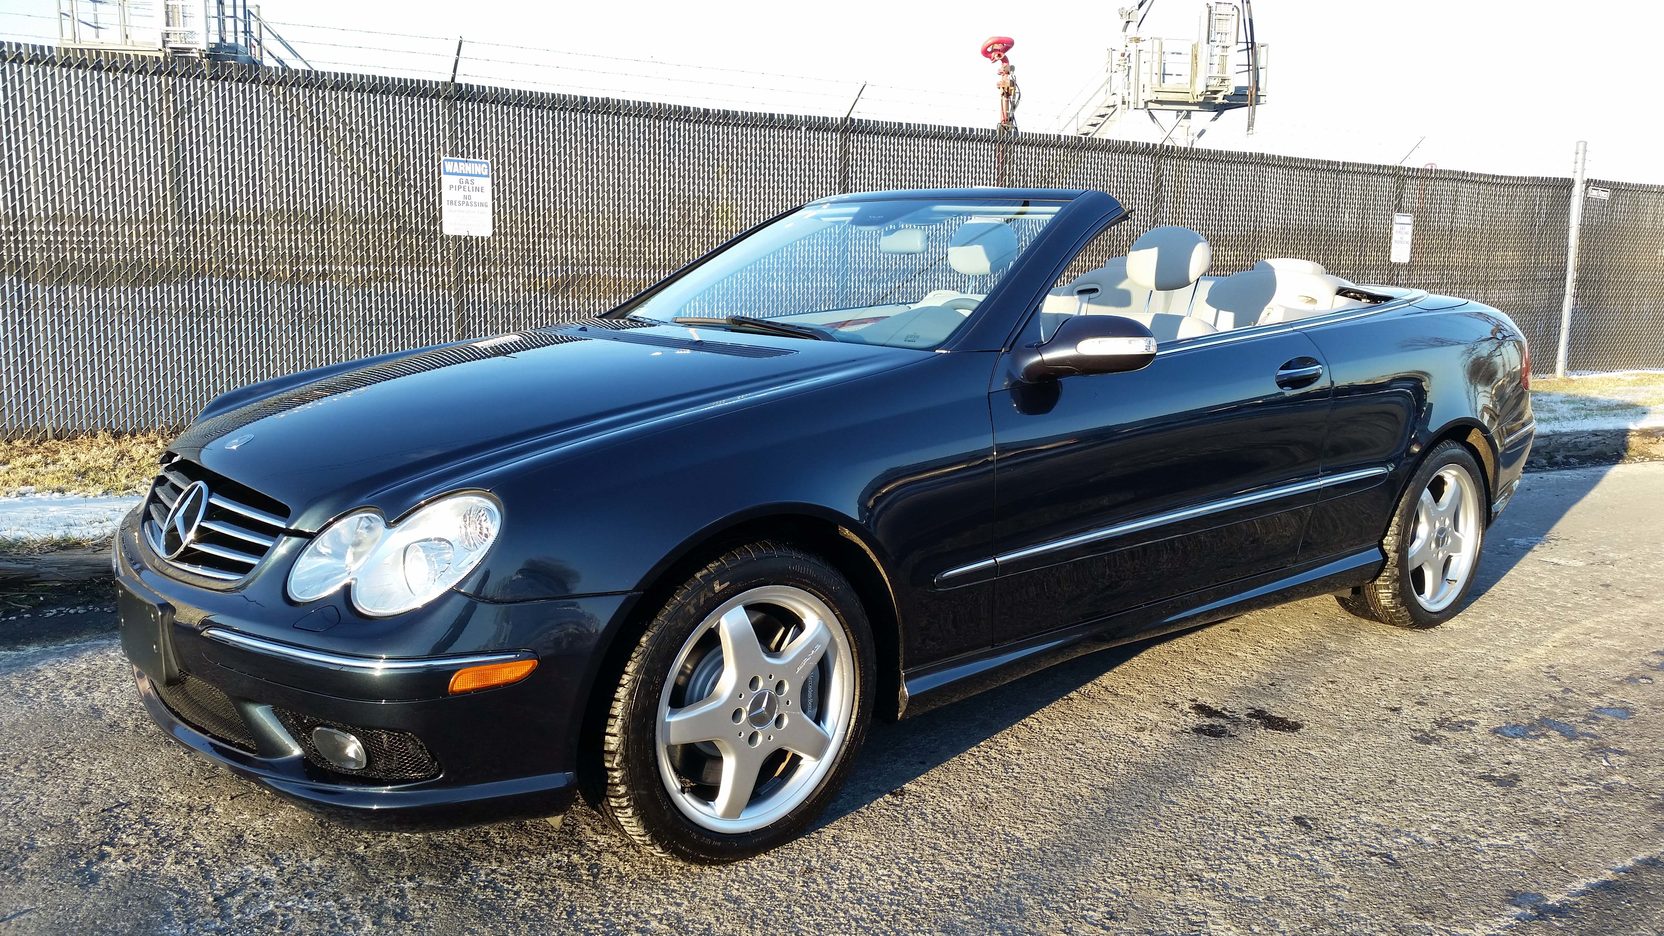 MERCEDES BENZ CLK350 2007 Delicate TOP CONVERTIBLE CLEAN Vehicle New JAPAN IMPORT-pic_1